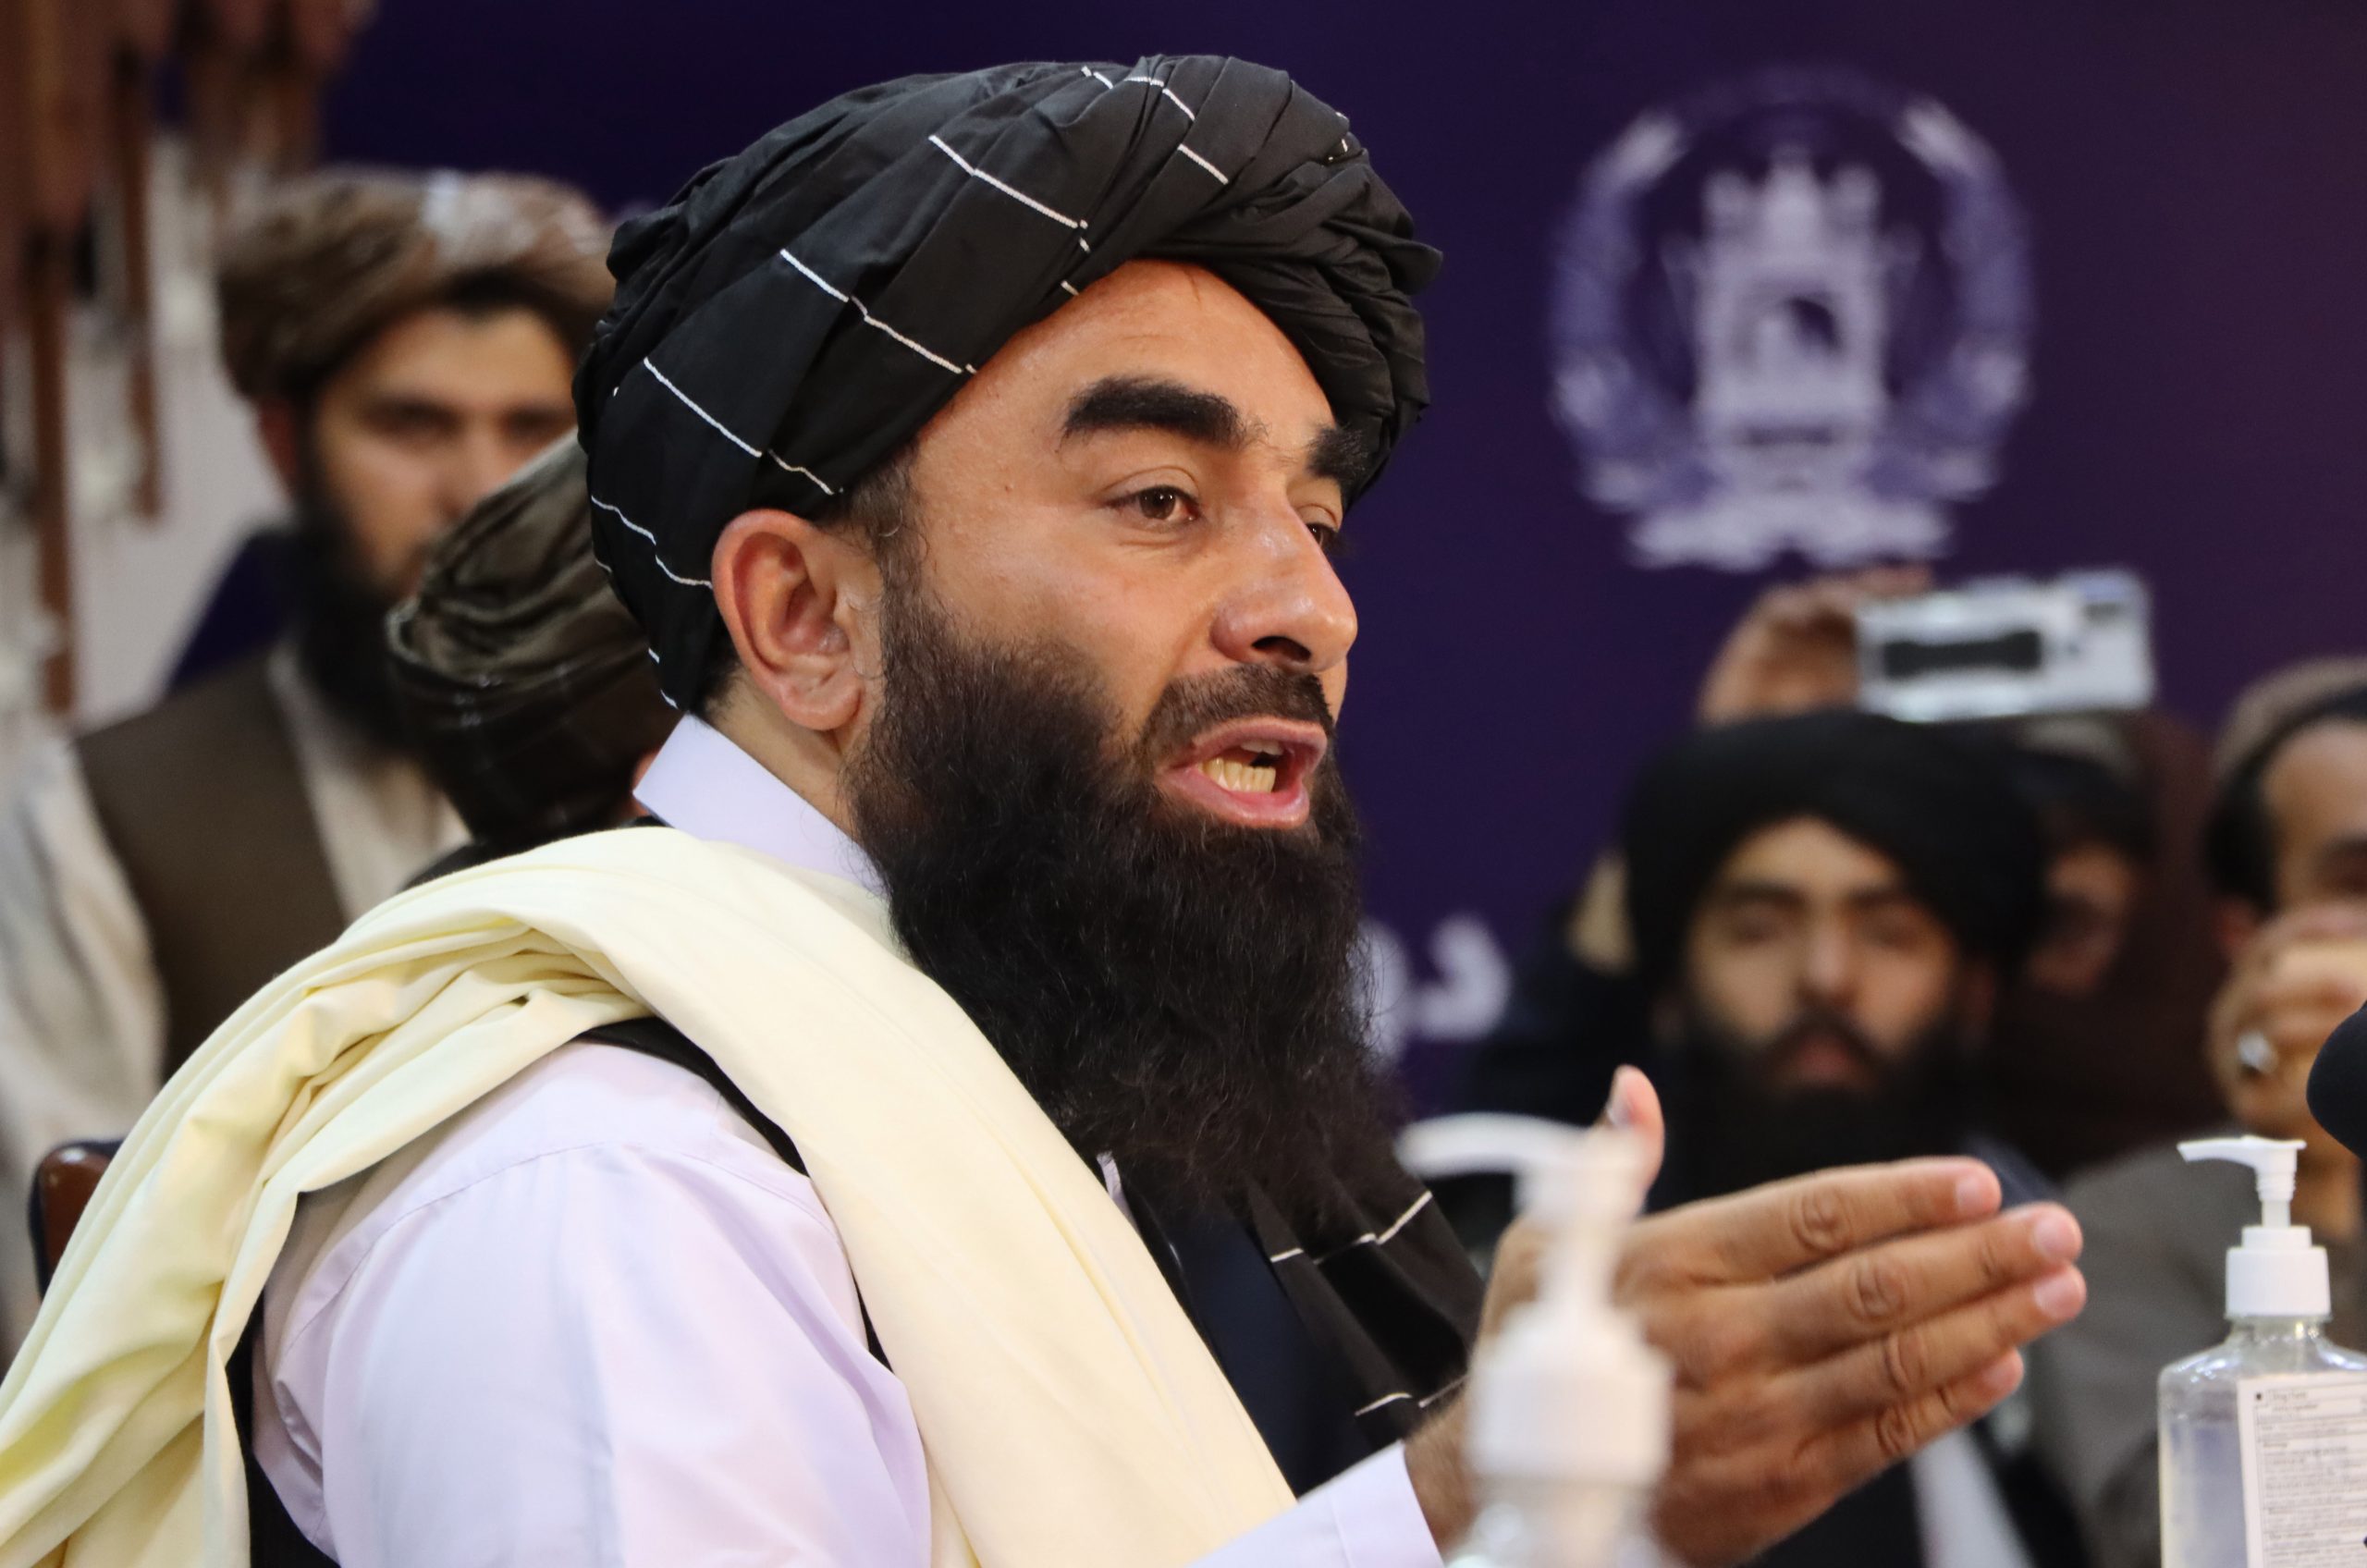 epa09418132 Zabihullah Mujahid, Taliban spokesman talks with journalists during a press conference in Kabul, Afghanistan, 17 August 2021. The new Taliban leadership that swept to power in Afghanistan has said it would not seek revenge against those who had fought against it and would protect the rights of Afghan women within the rules of Sharia law. Mujahid added the Taliban would work to avoid any return to conflict or for Afghanistan to become a hub for terrorism that would threaten other countries in the region.  EPA/STRINGER